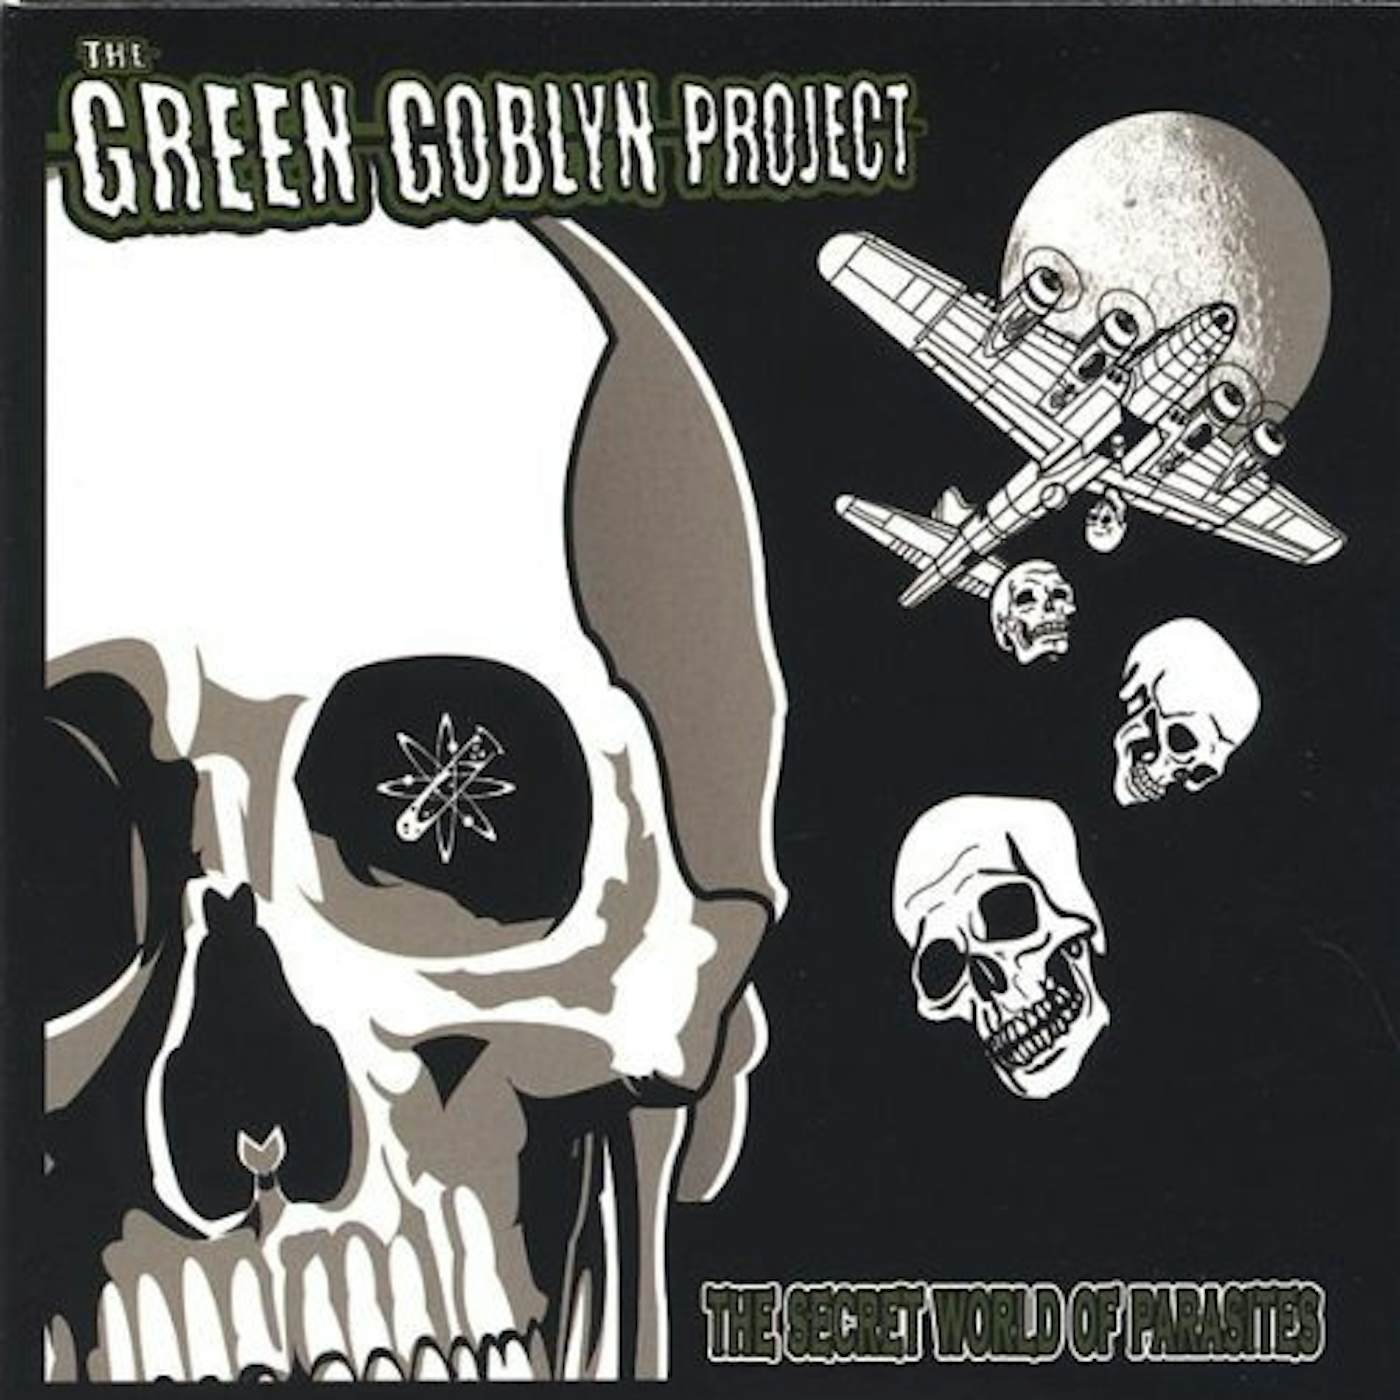 The Green Goblyn Project SECRET WORLD OF PARASITES CD